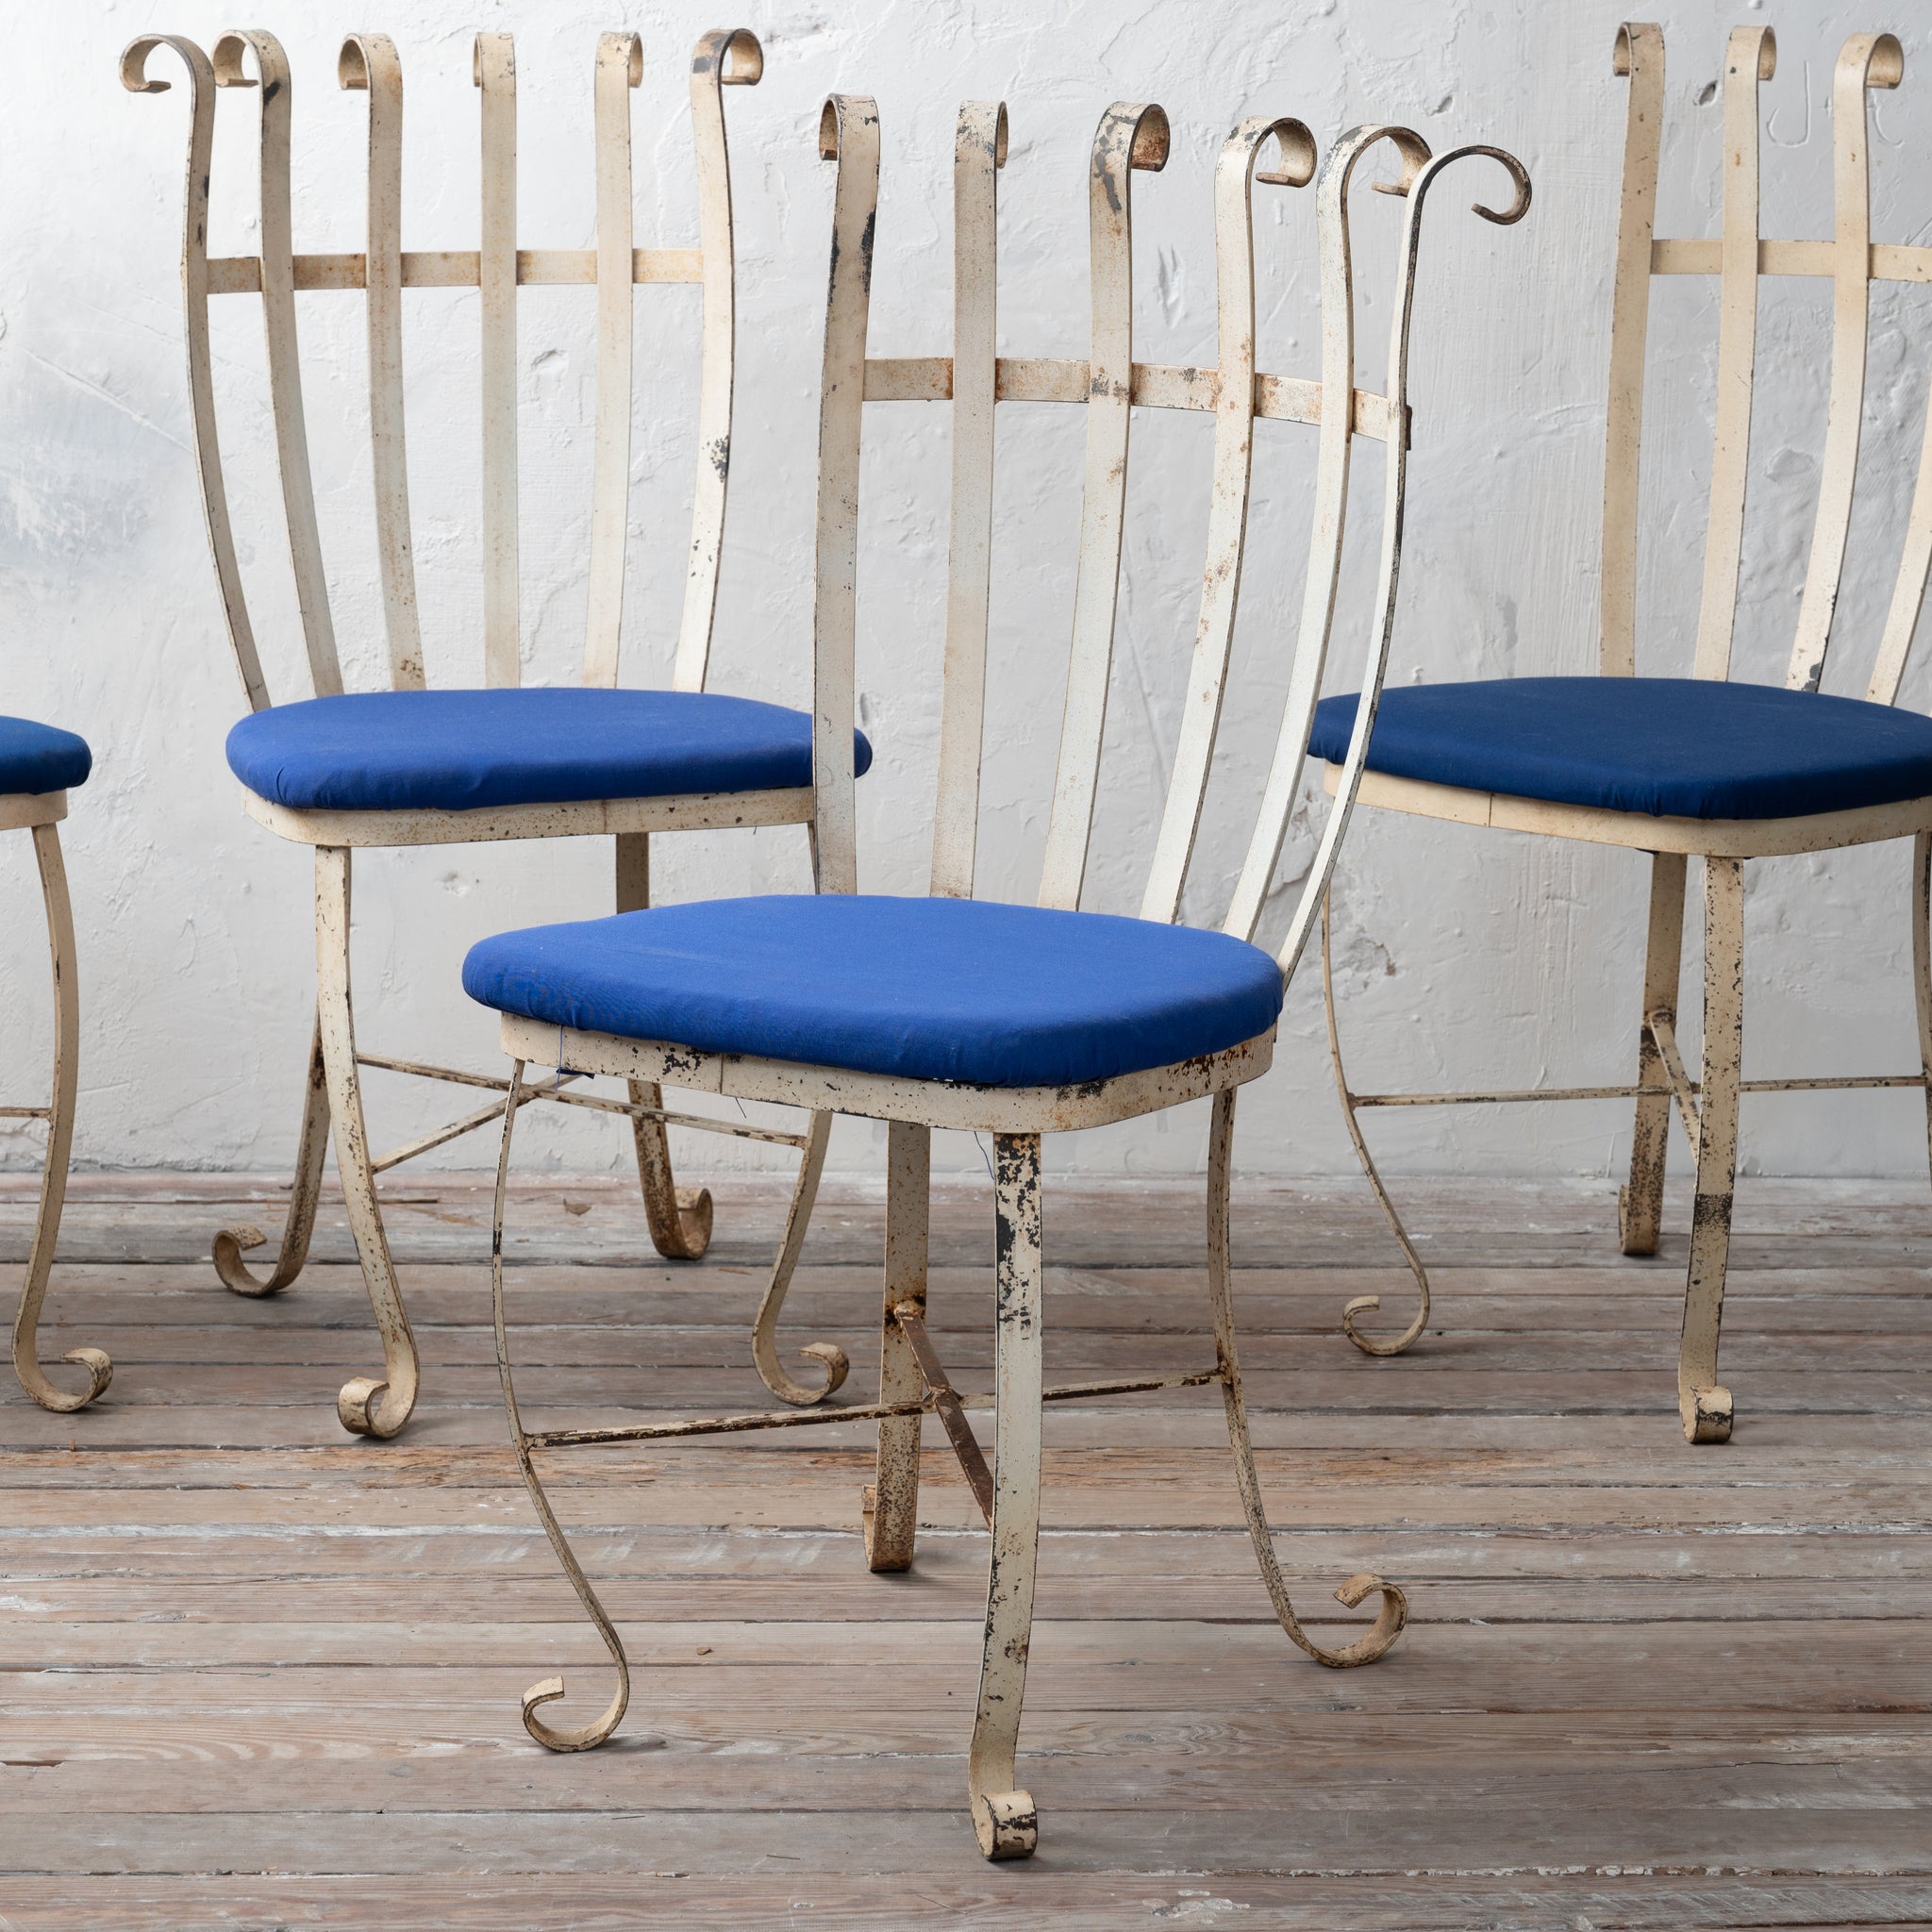 Scrolled Wrought Iron Chairs